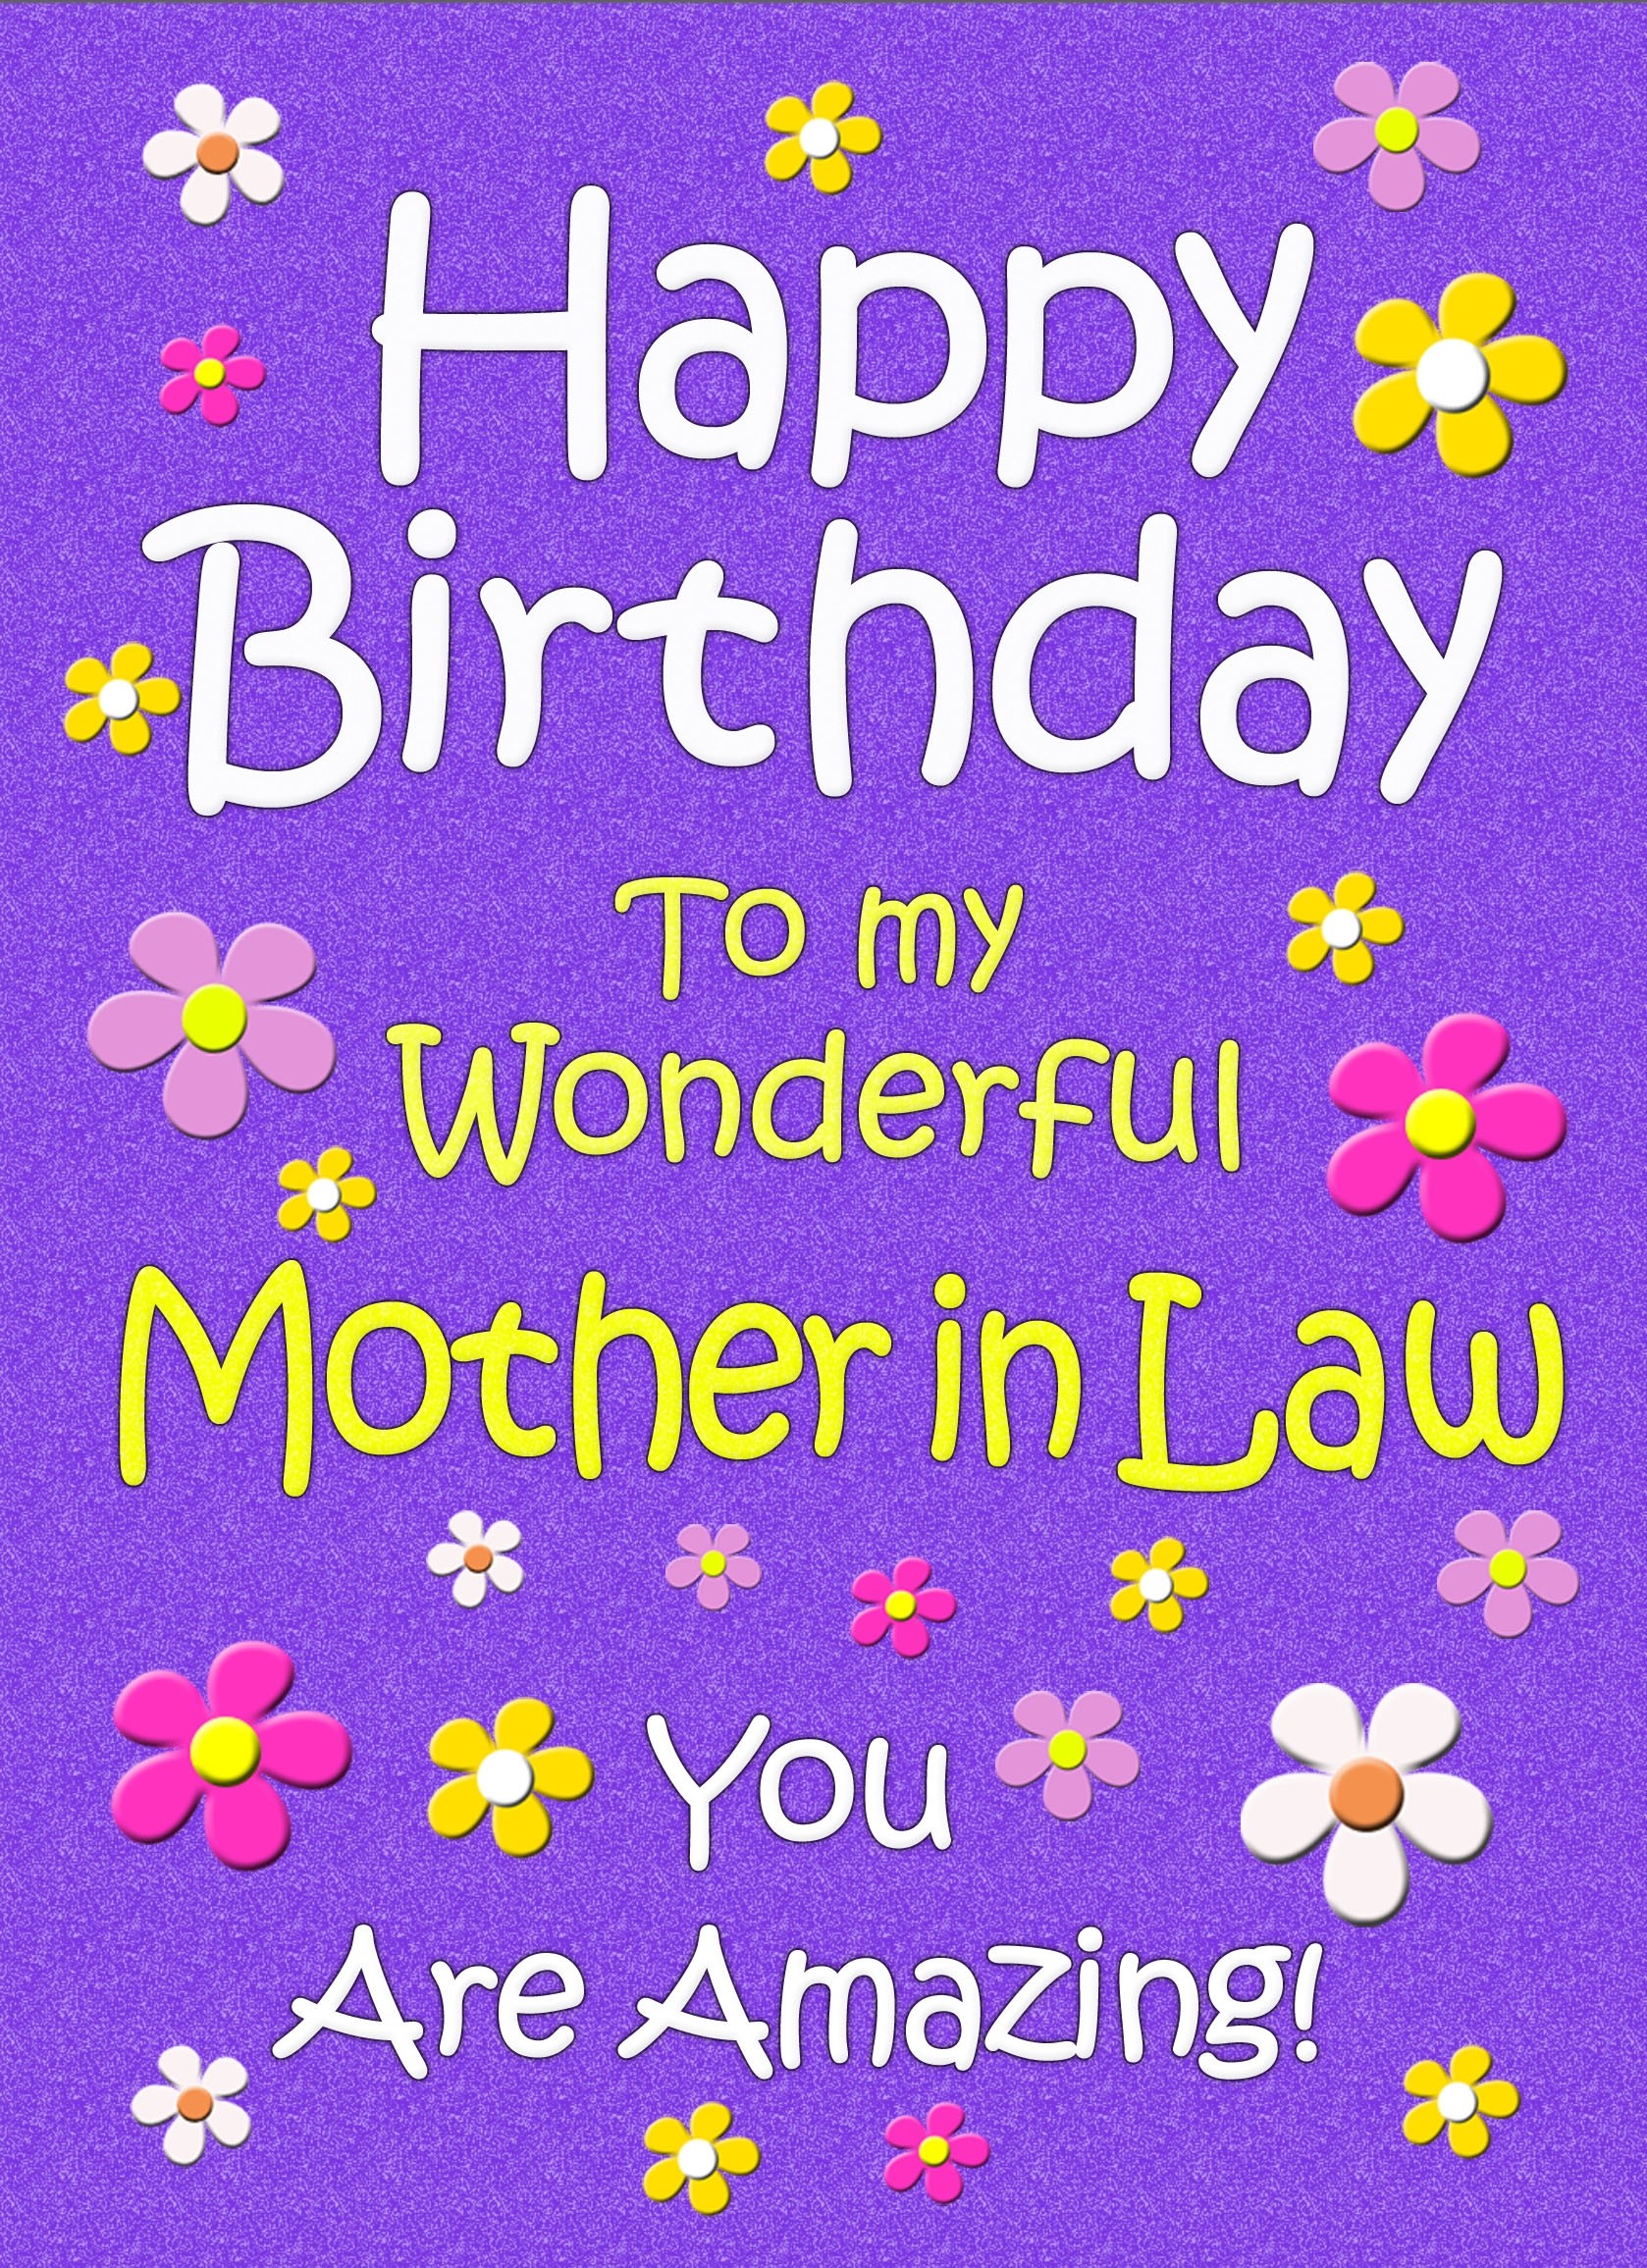 Mother in Law Birthday Card (Purple)